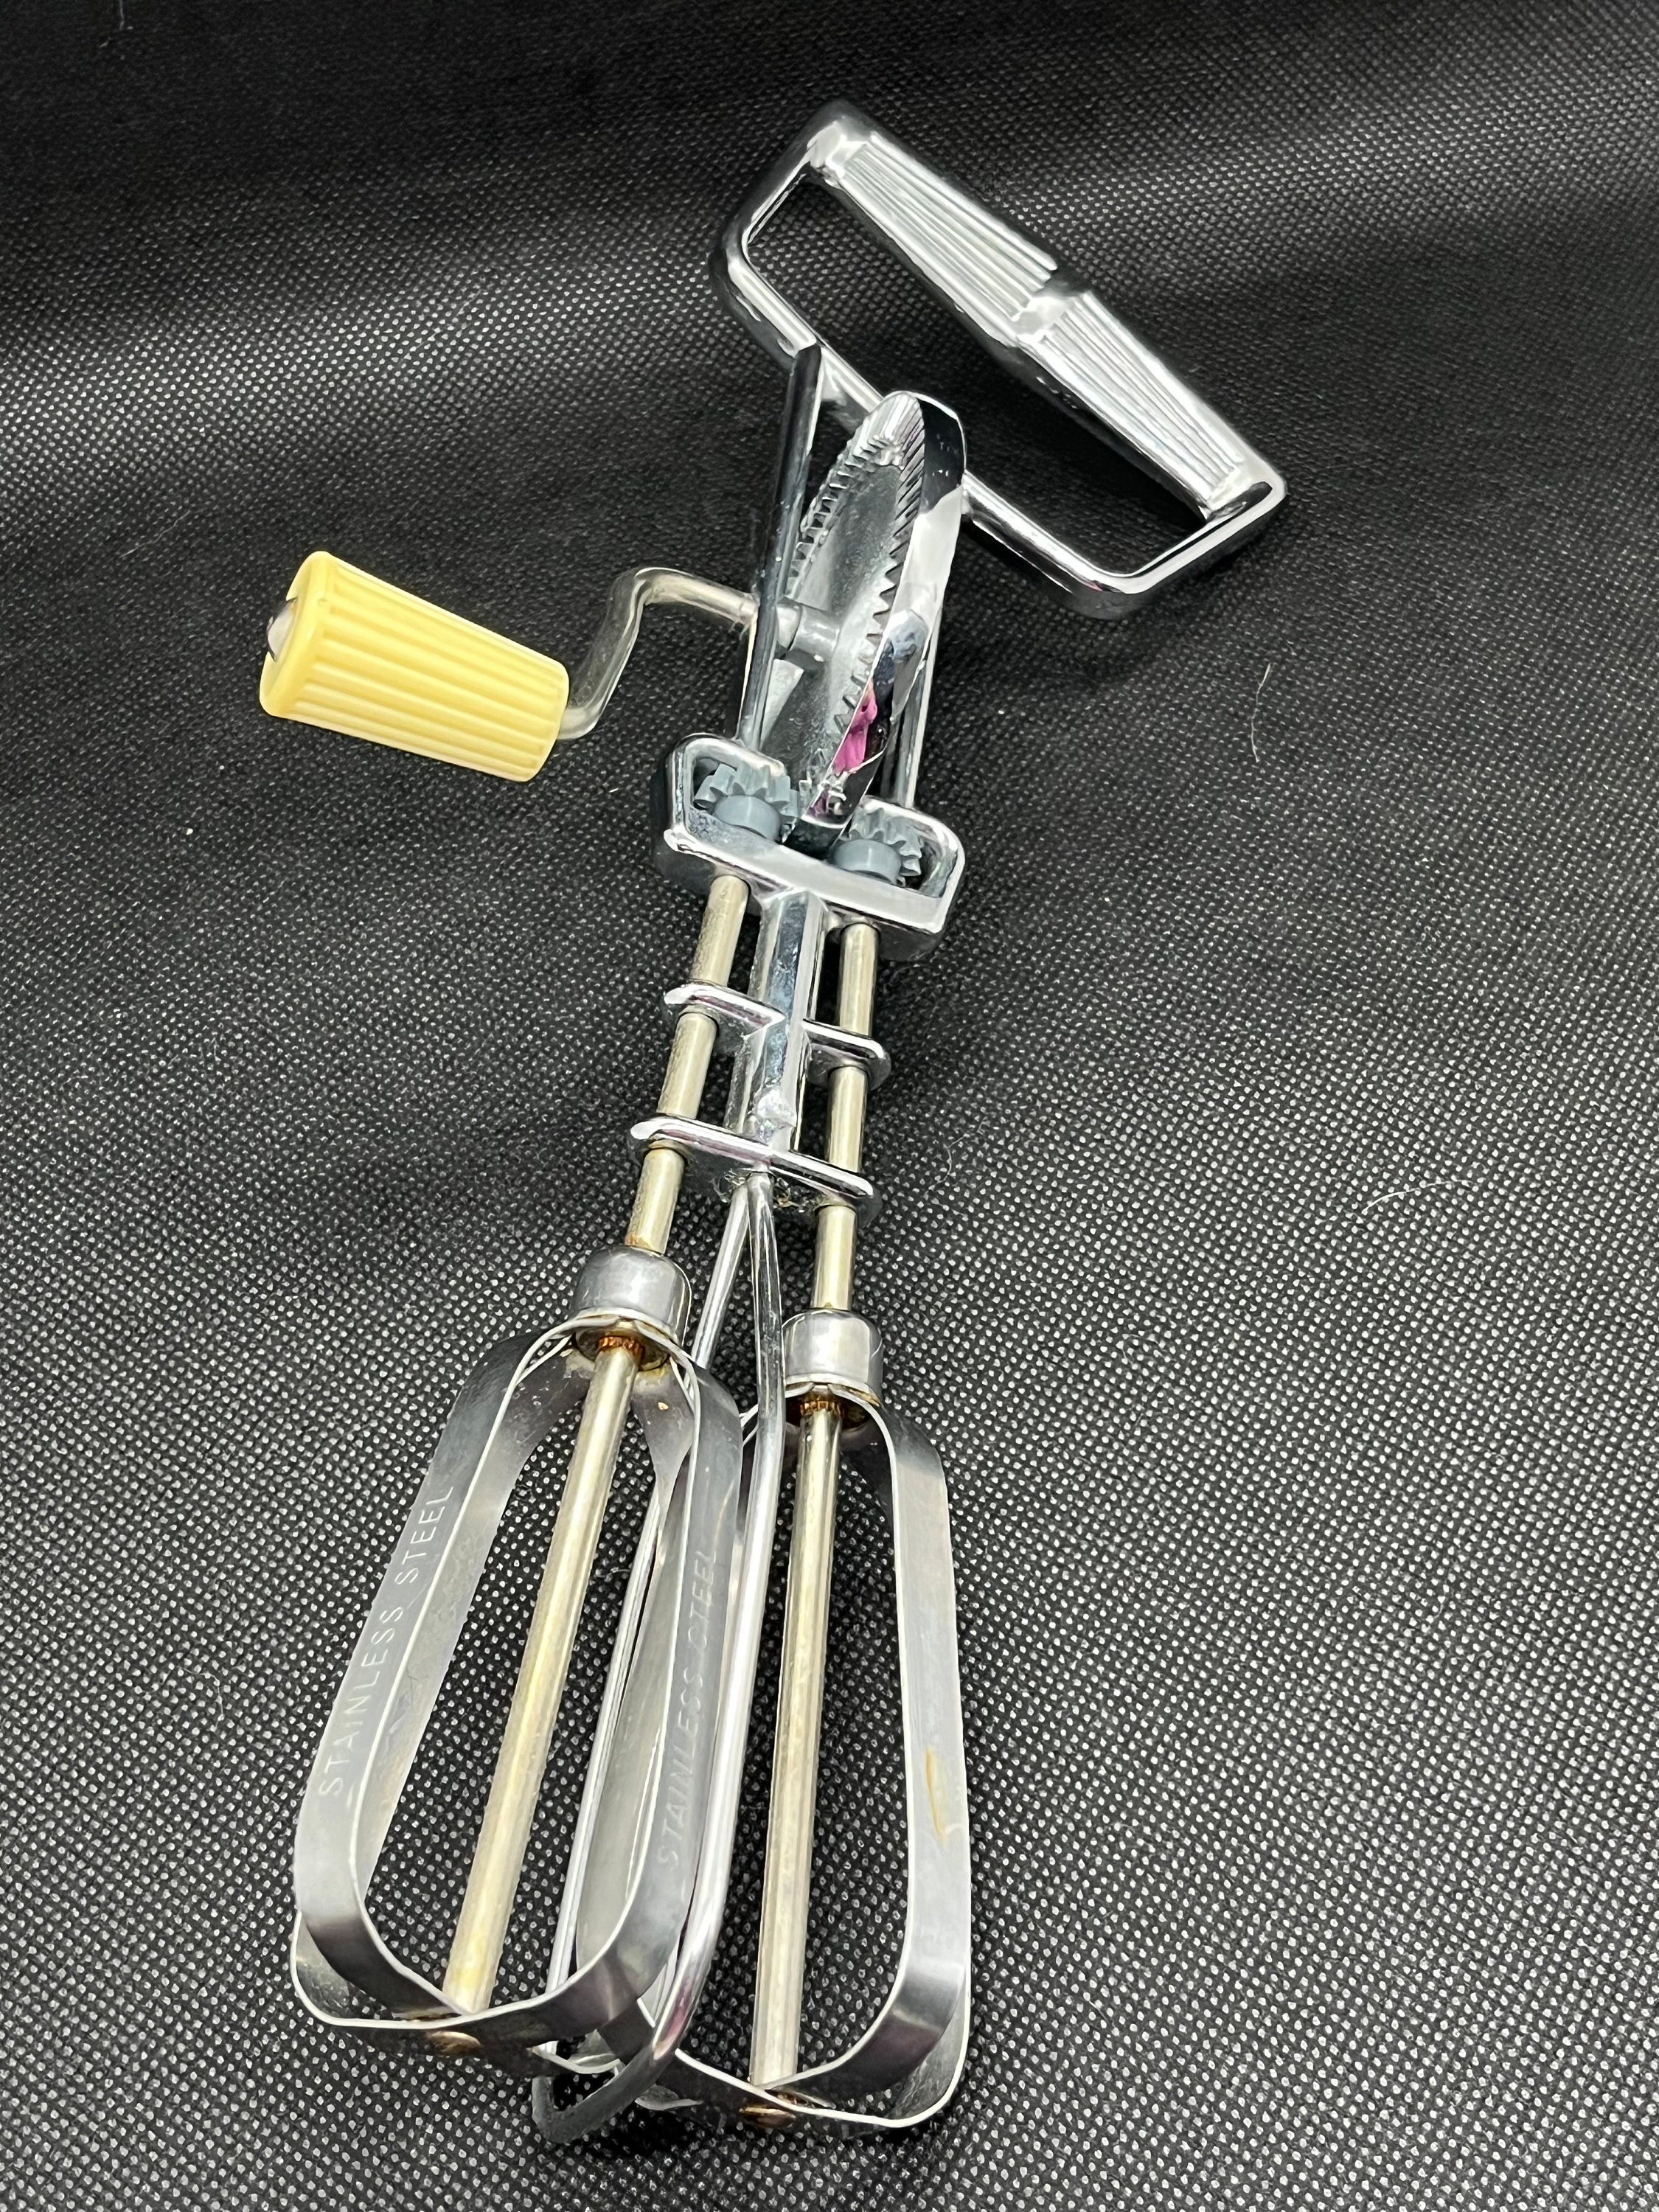 Review for Hand Whisk Rotary Egg Beater! 